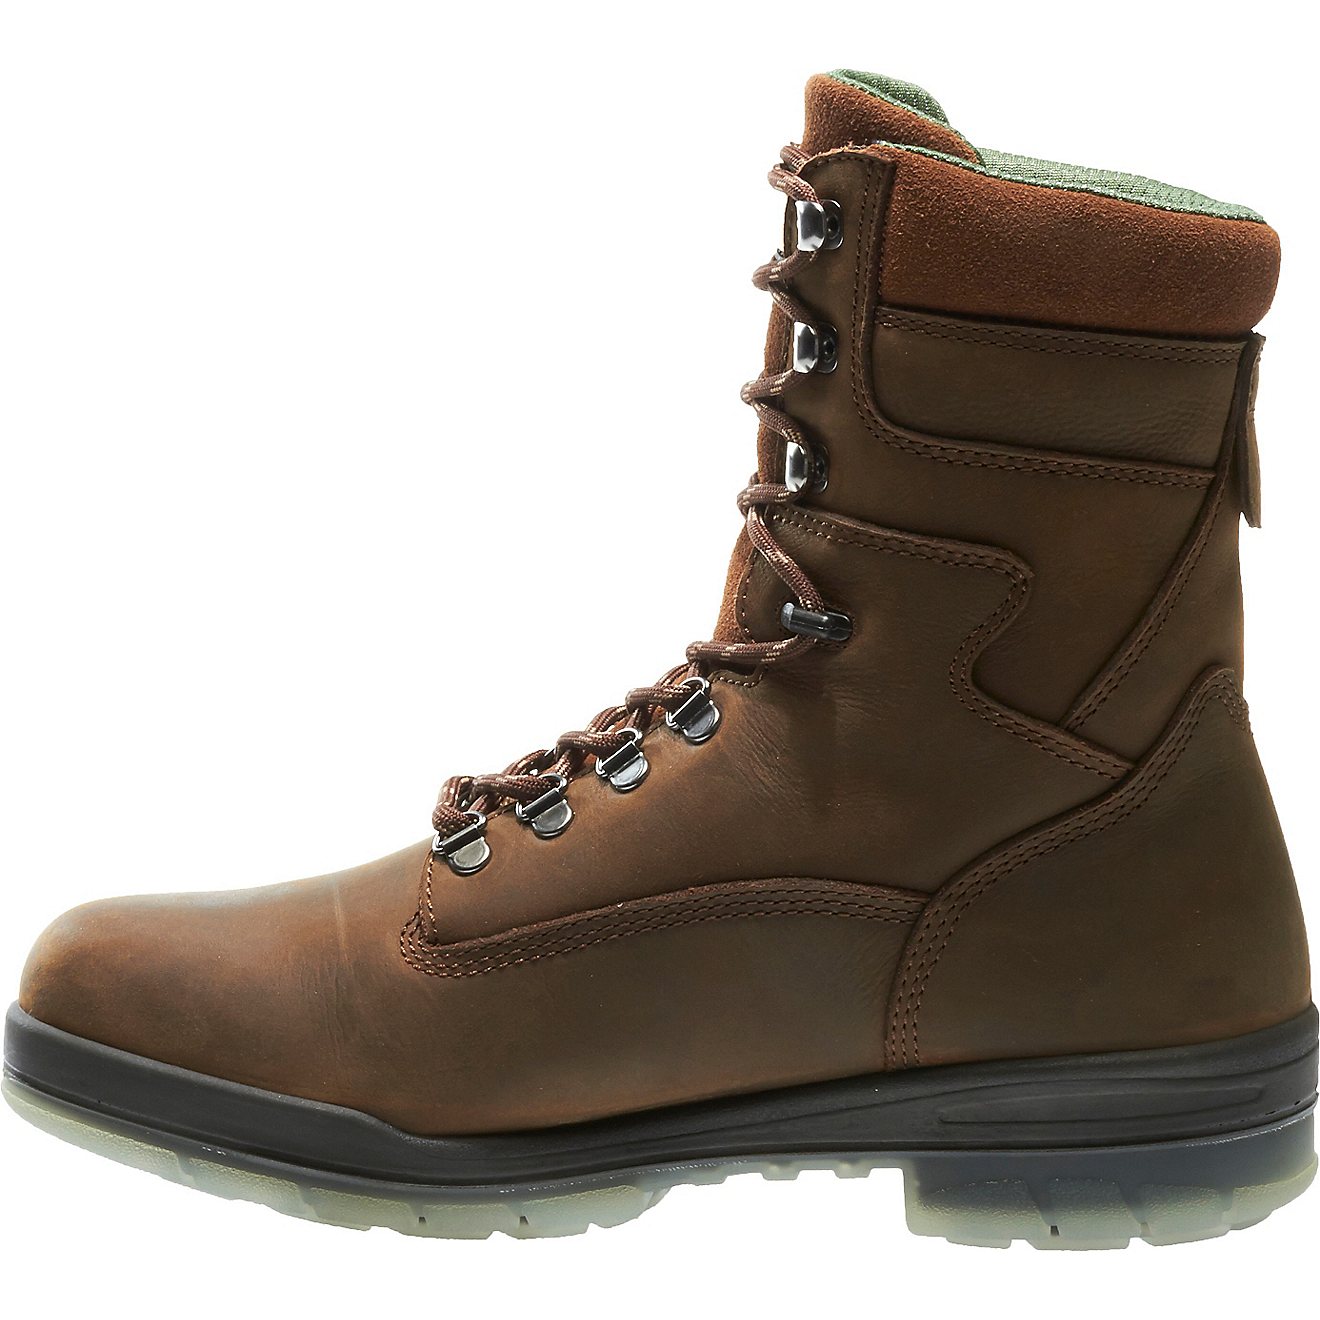 Wolverine Men's DuraShock Insulated EH Lace Up Work Boots | Academy